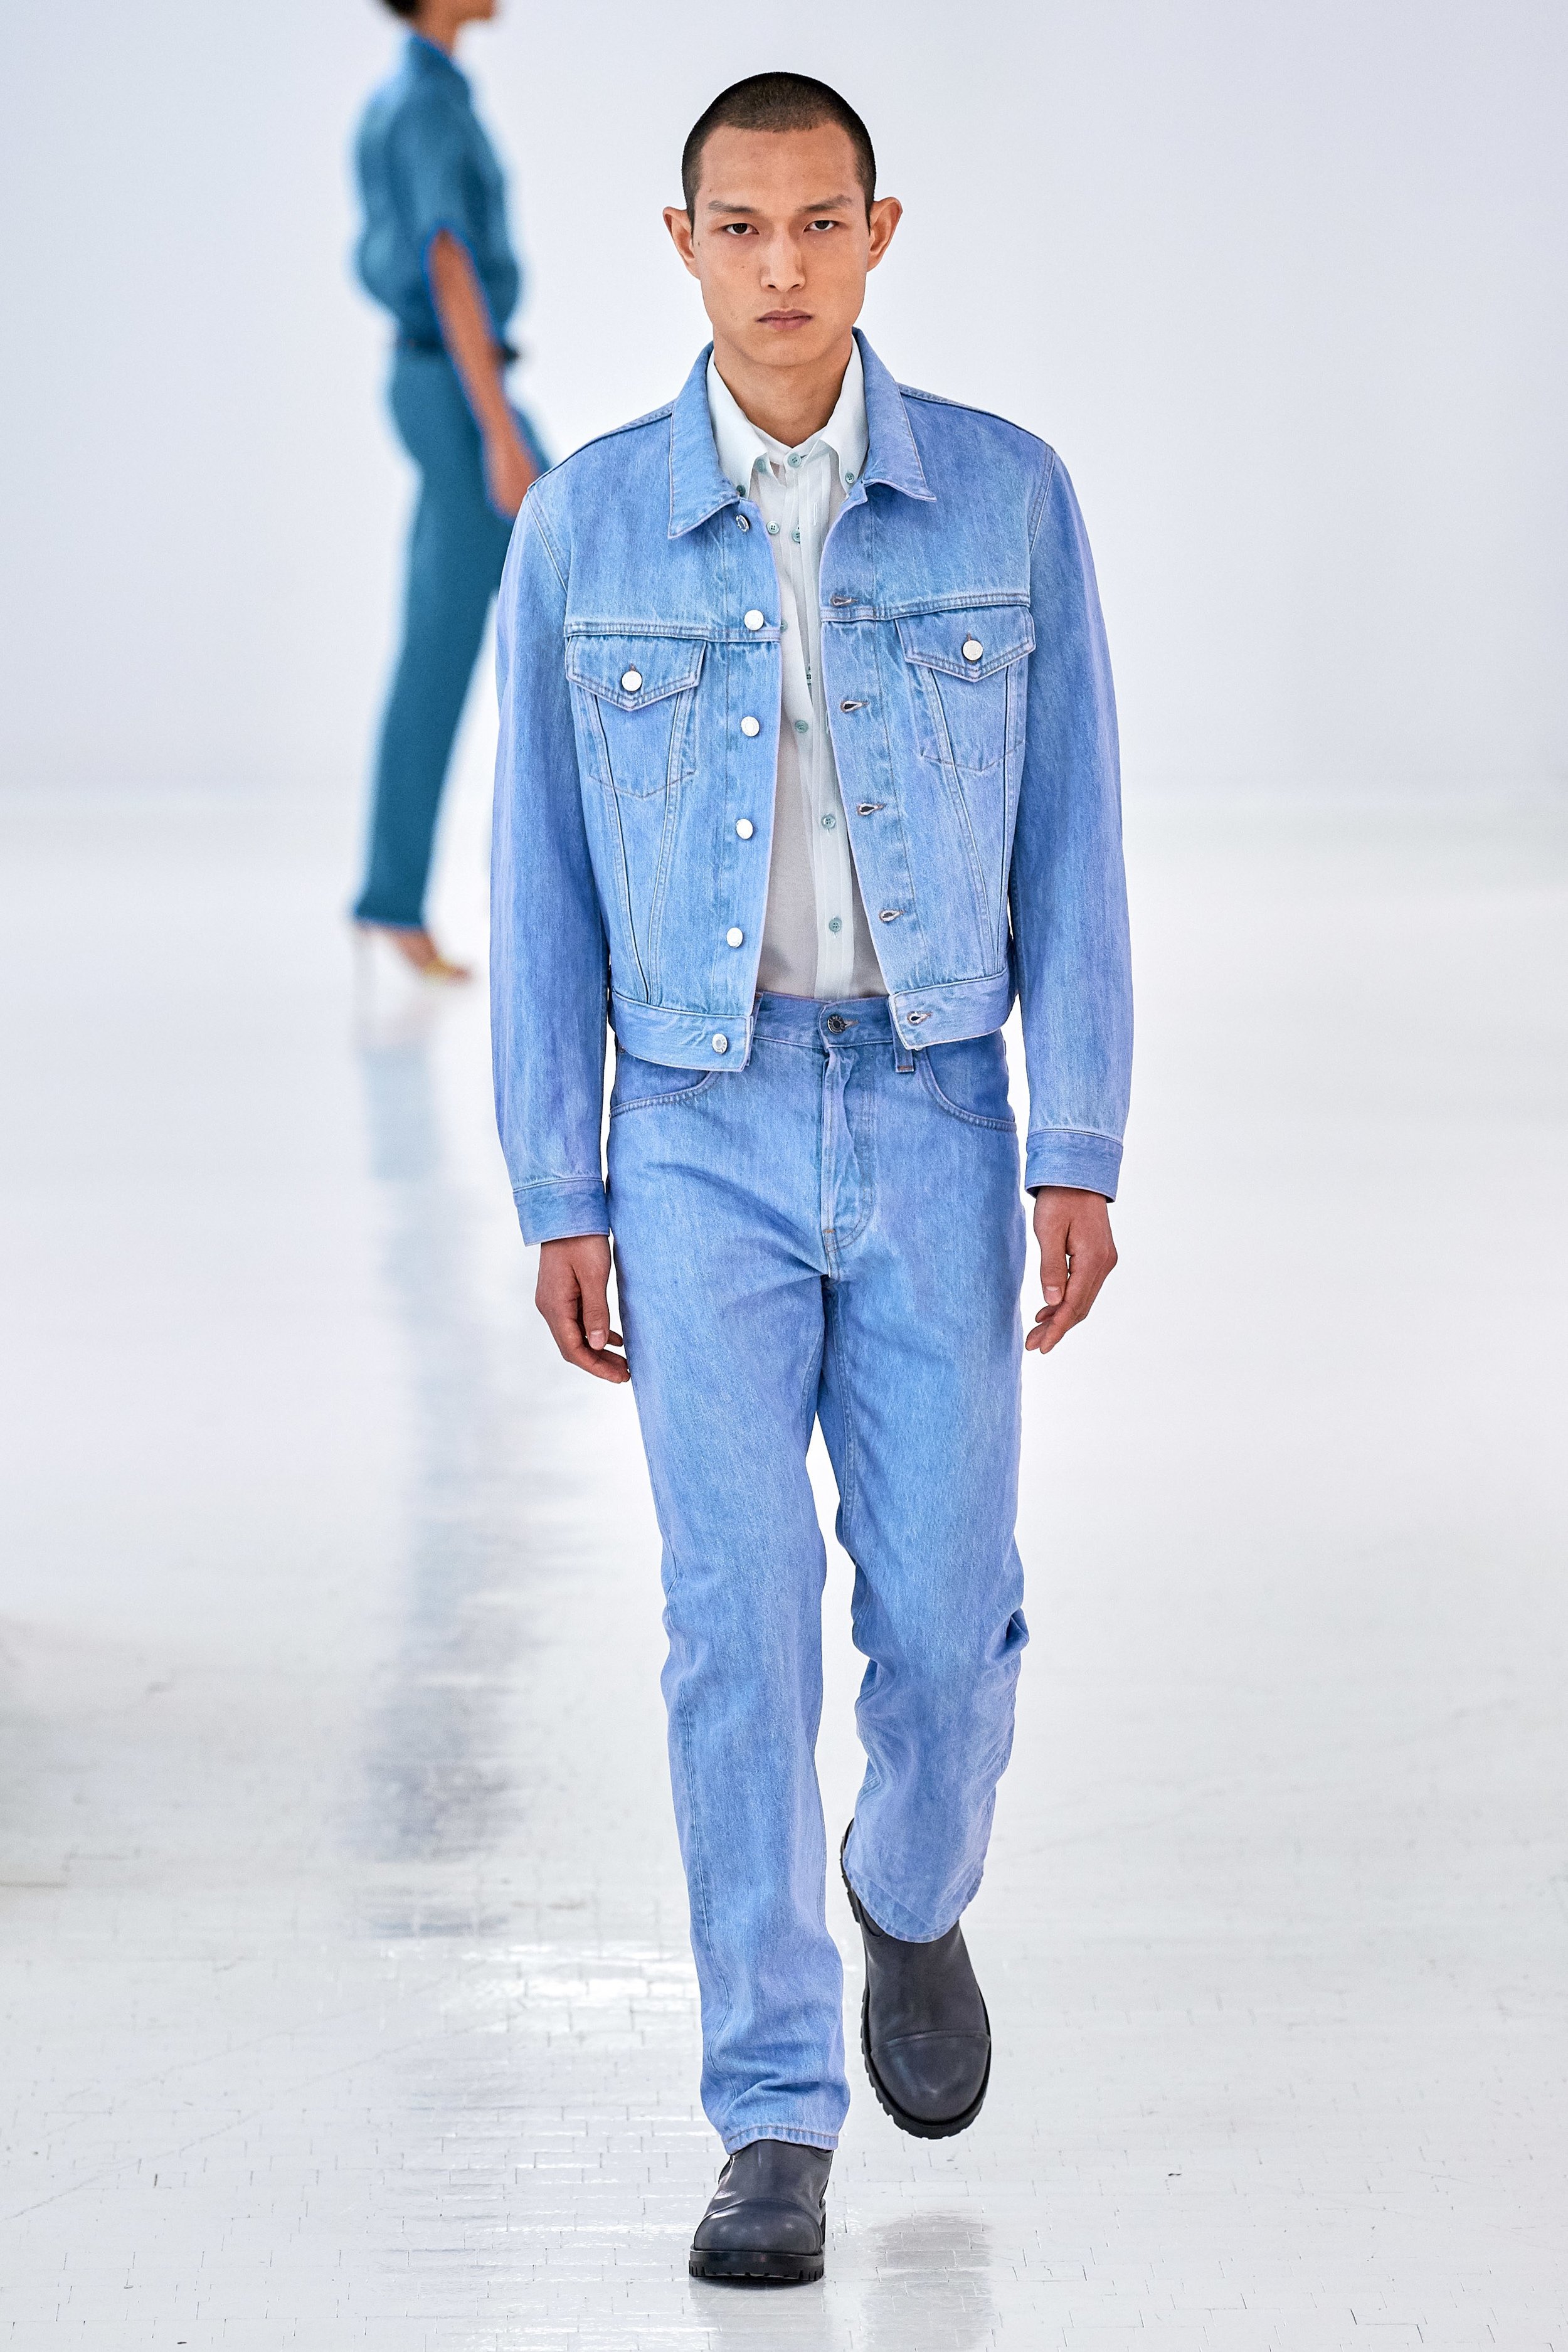 Helmut Lang NYFW SPRING 2020 READY-TO-WEAR